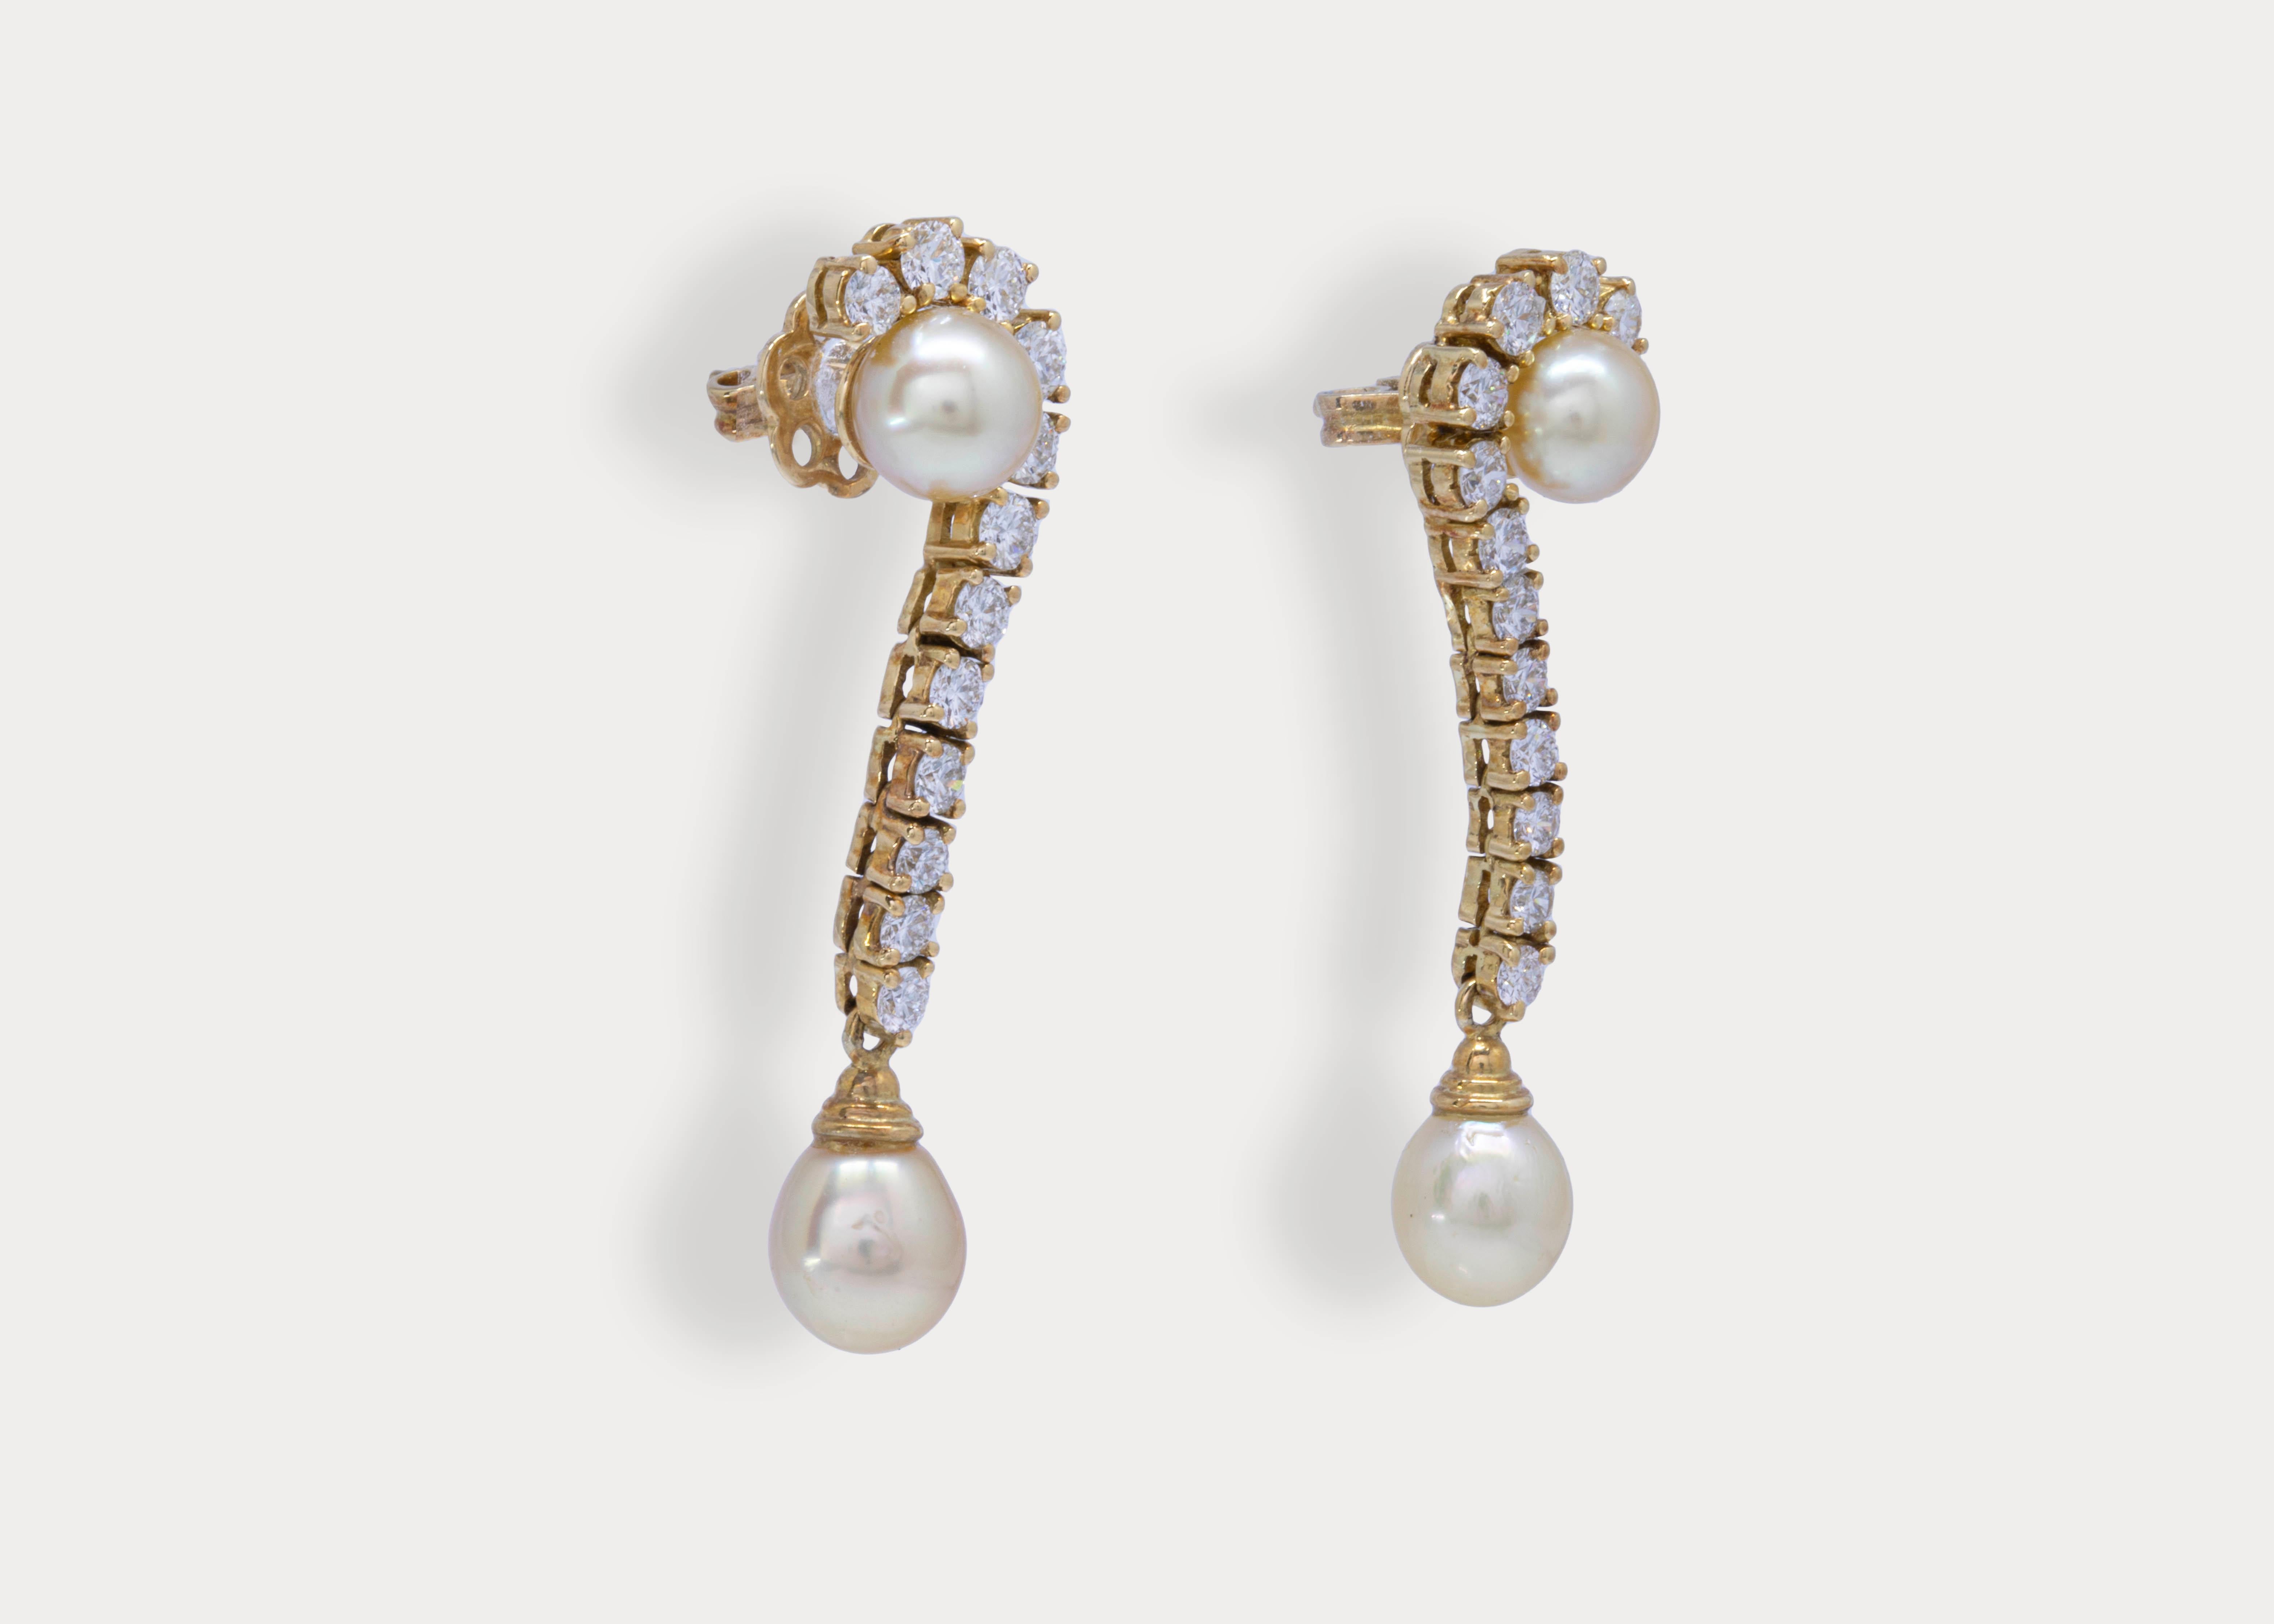 VS1 diamonds wrap around a pair of high luster Pinctada Radiata natural pearls.
2 near identical drops hang from these 18k yellow gold earrings.

*These earrings are one a kind.

Gold Weight: 5.2 g
Pearl Weight: 6.71 ct.
Diamond Weight: 1.3 ct.